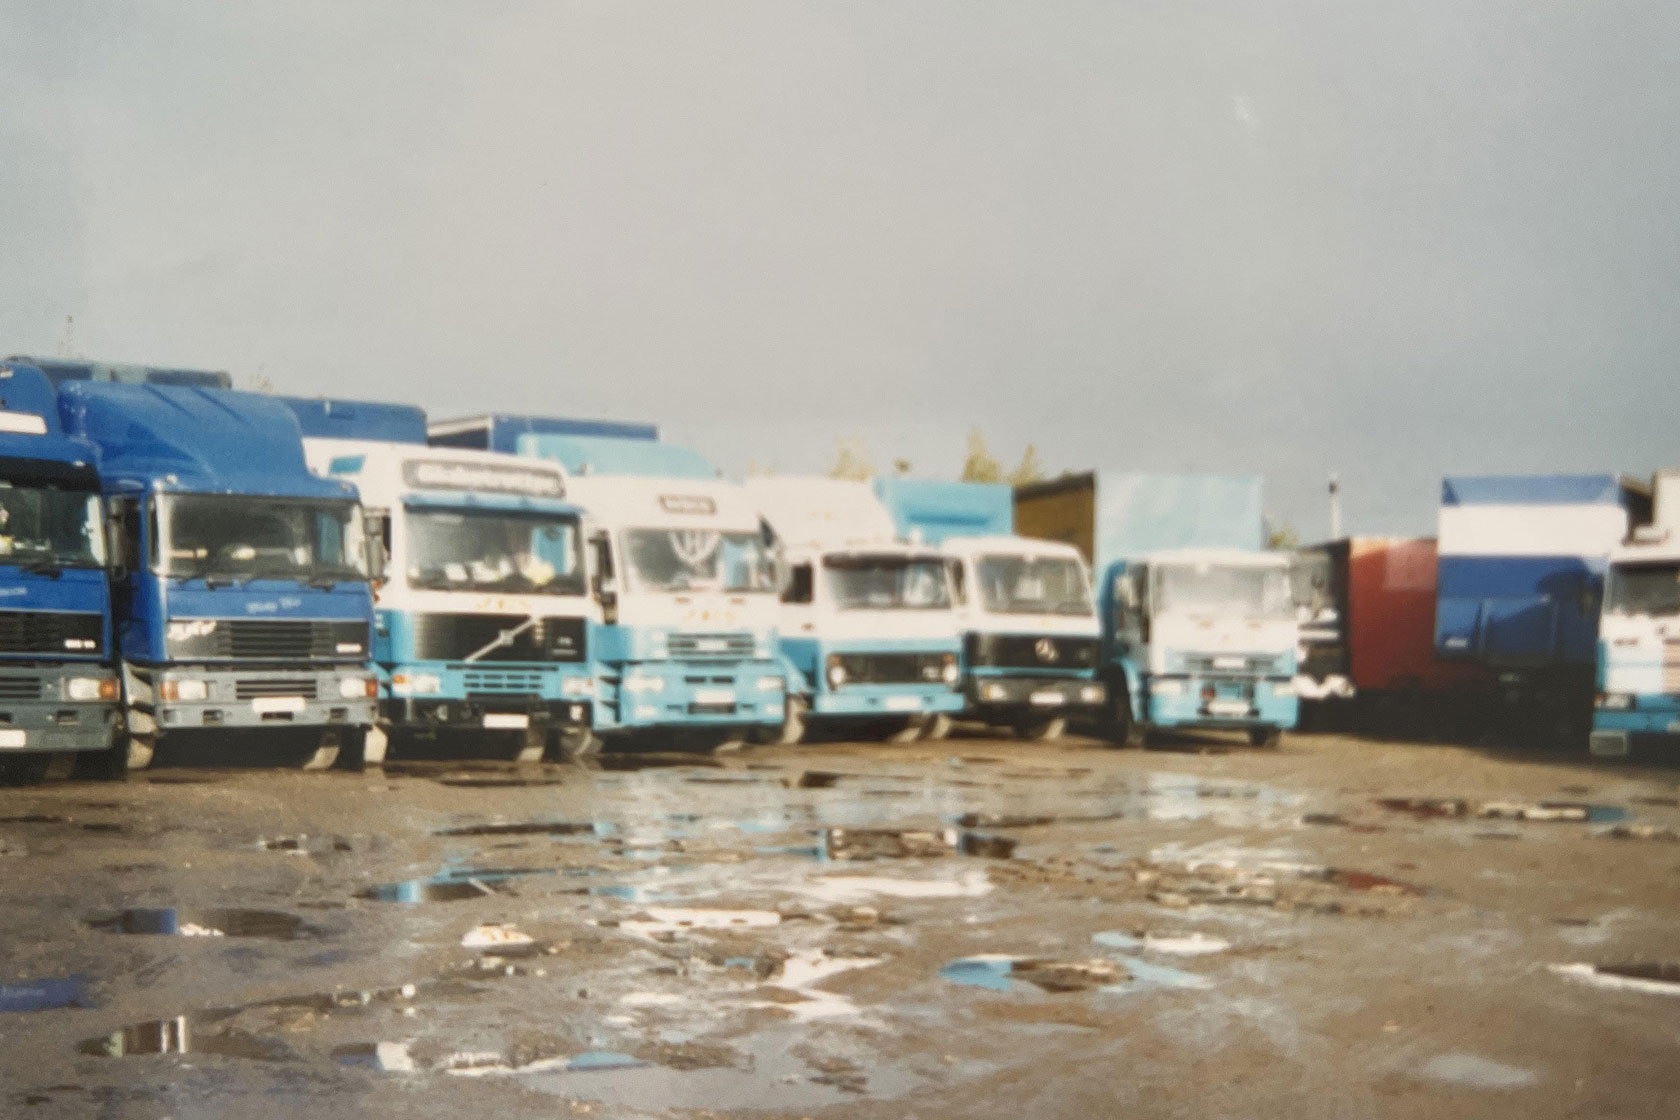 Old image of the new location with all of the trucks we had at the time, all blue and white trucks in the yard.